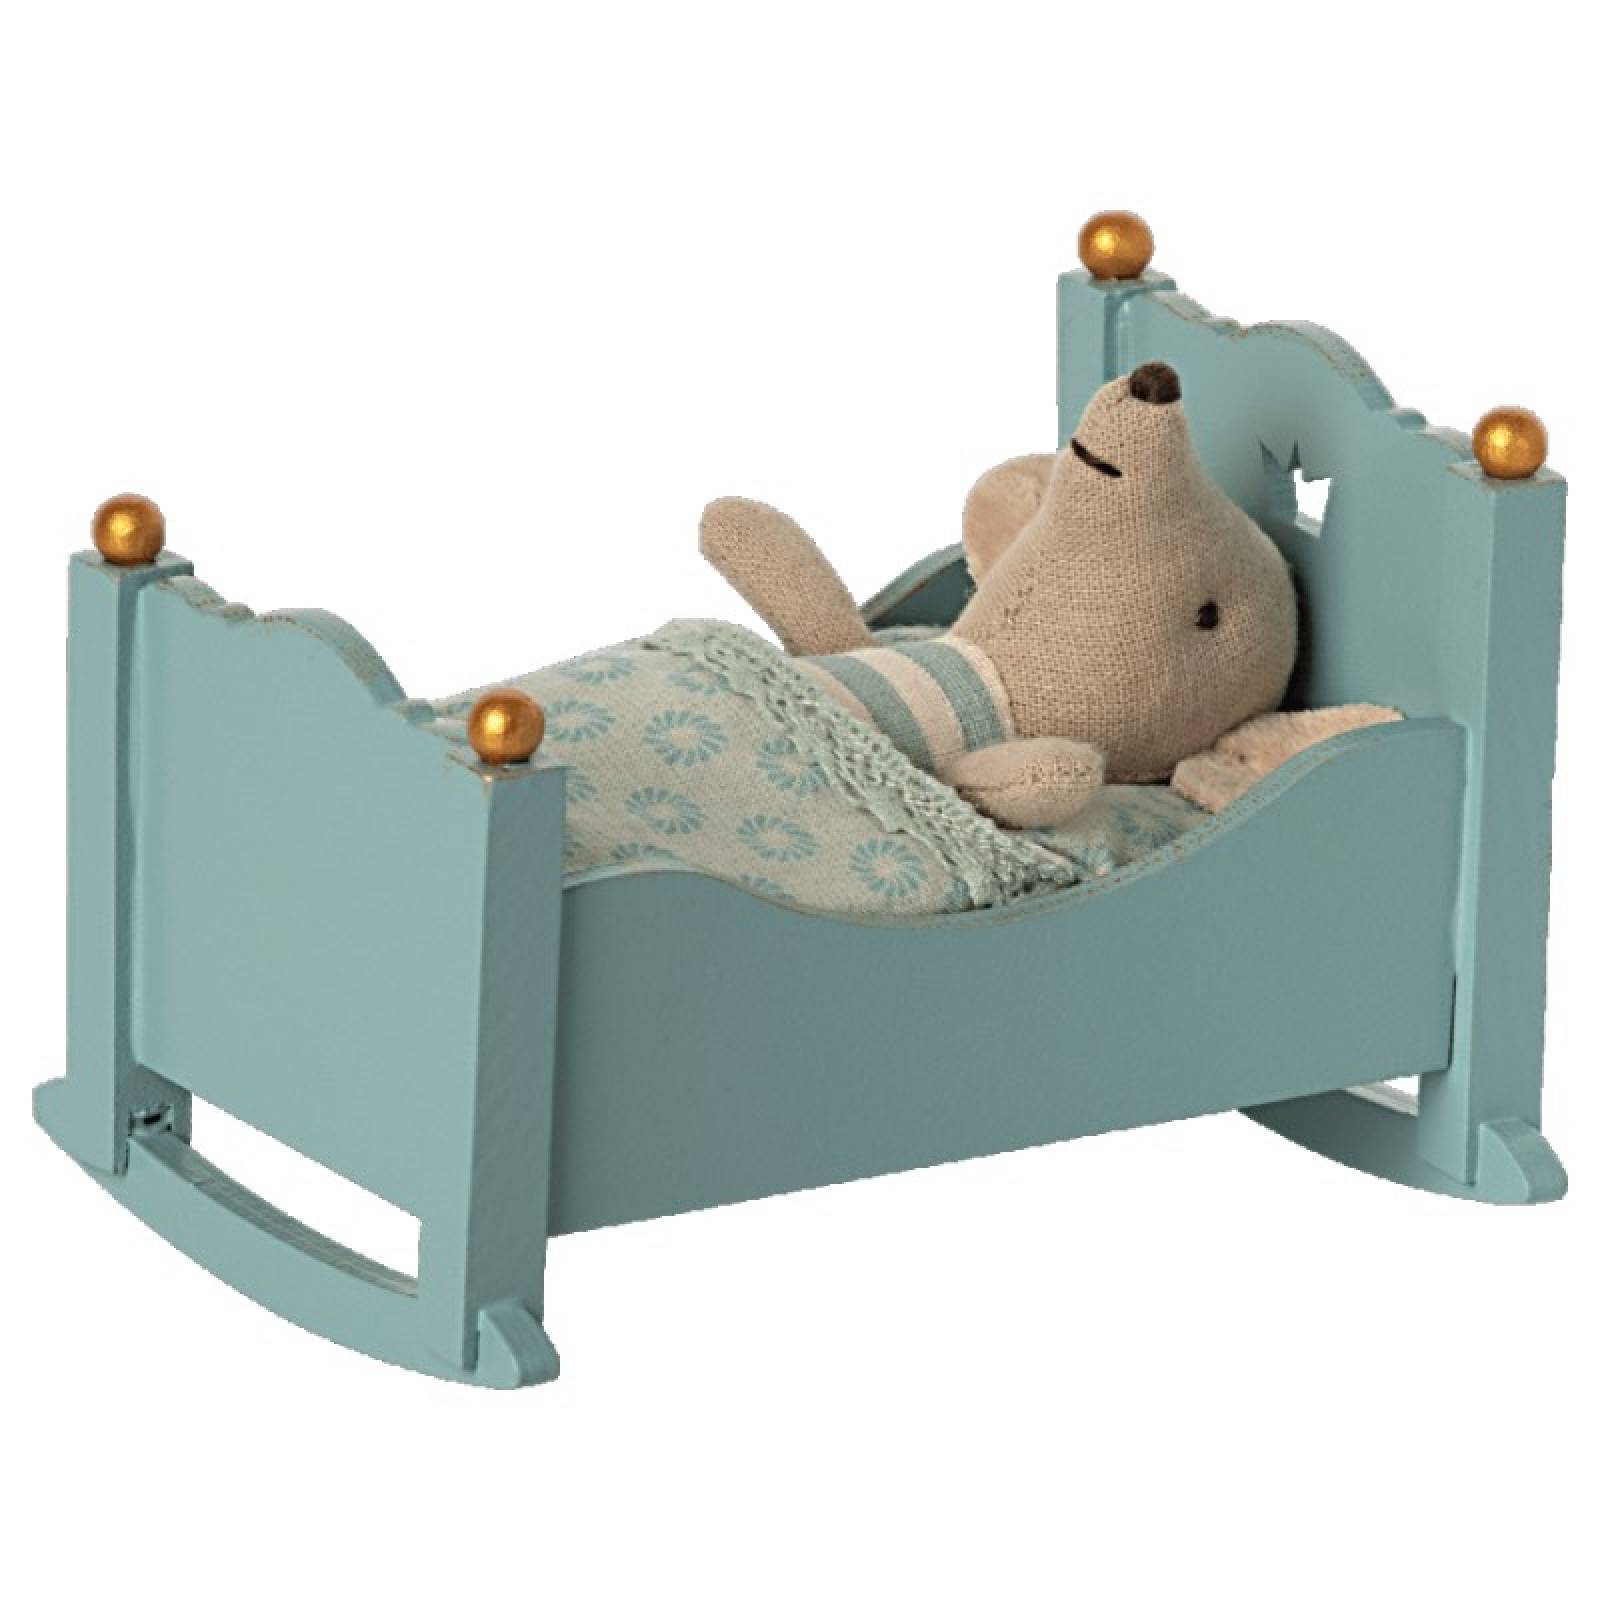 Miniature Cradle For Baby Mouse In Blue By Maileg 3+ thumbnails